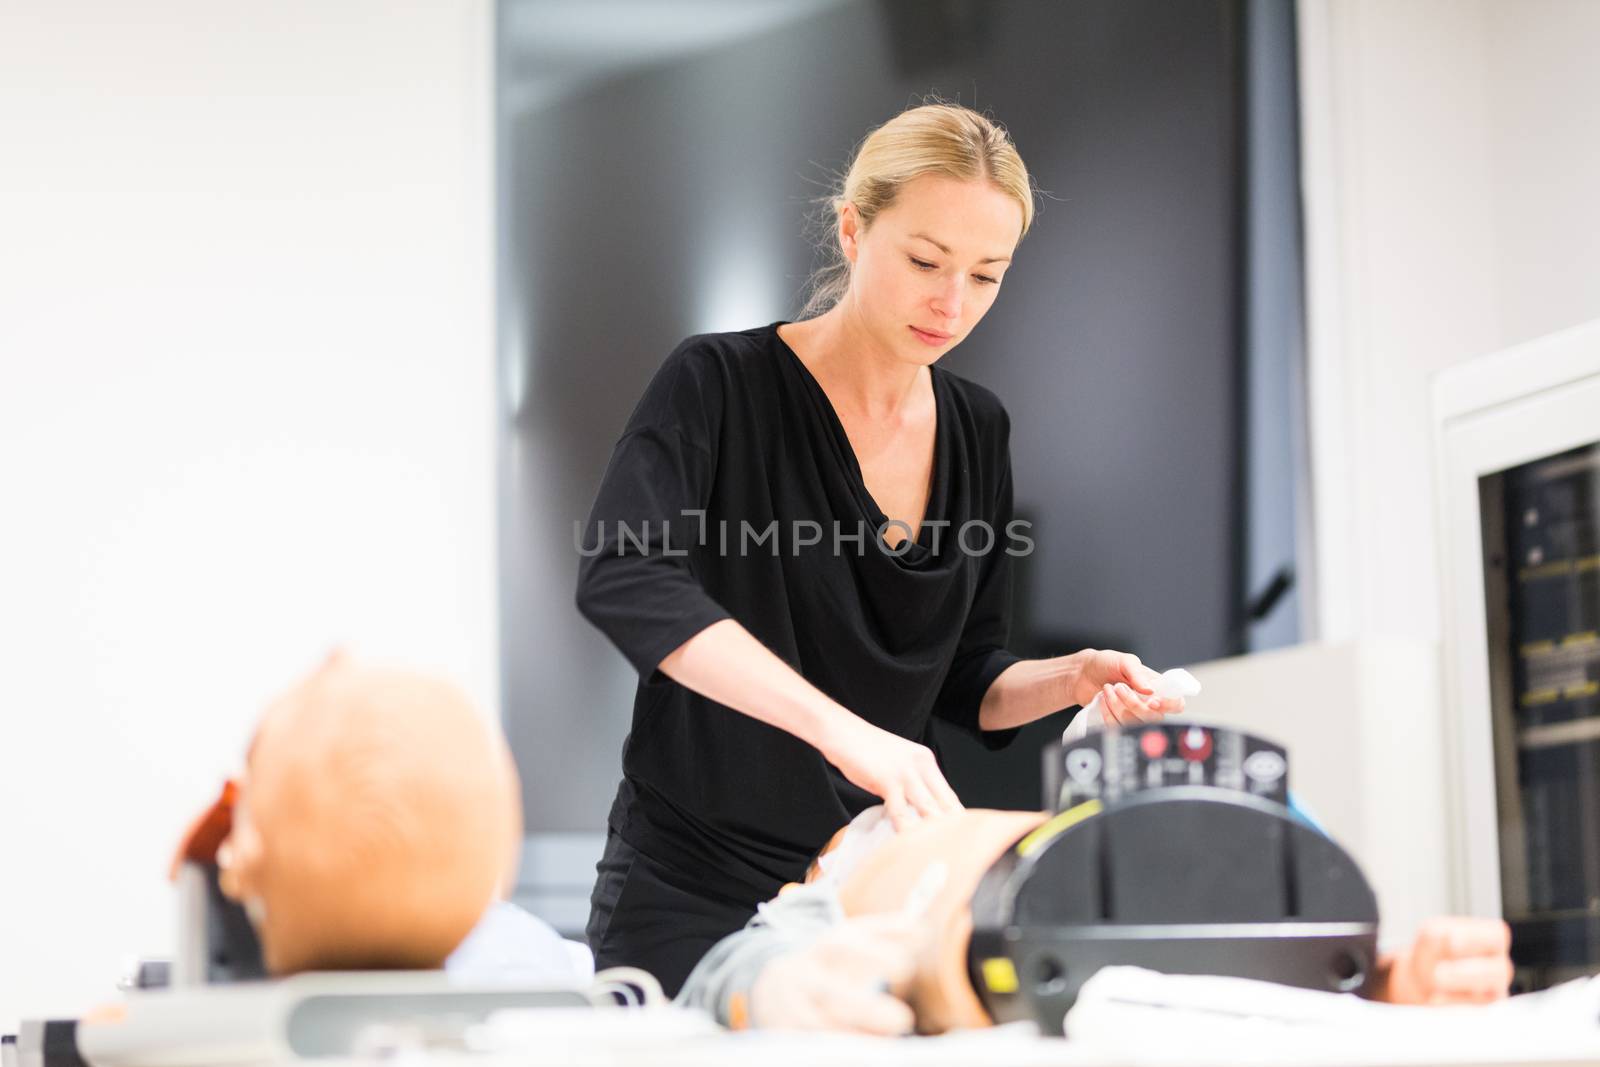 Medical doctor specialist expert displaying method of patient intubation technique on hands on medical education training and workshop by kasto